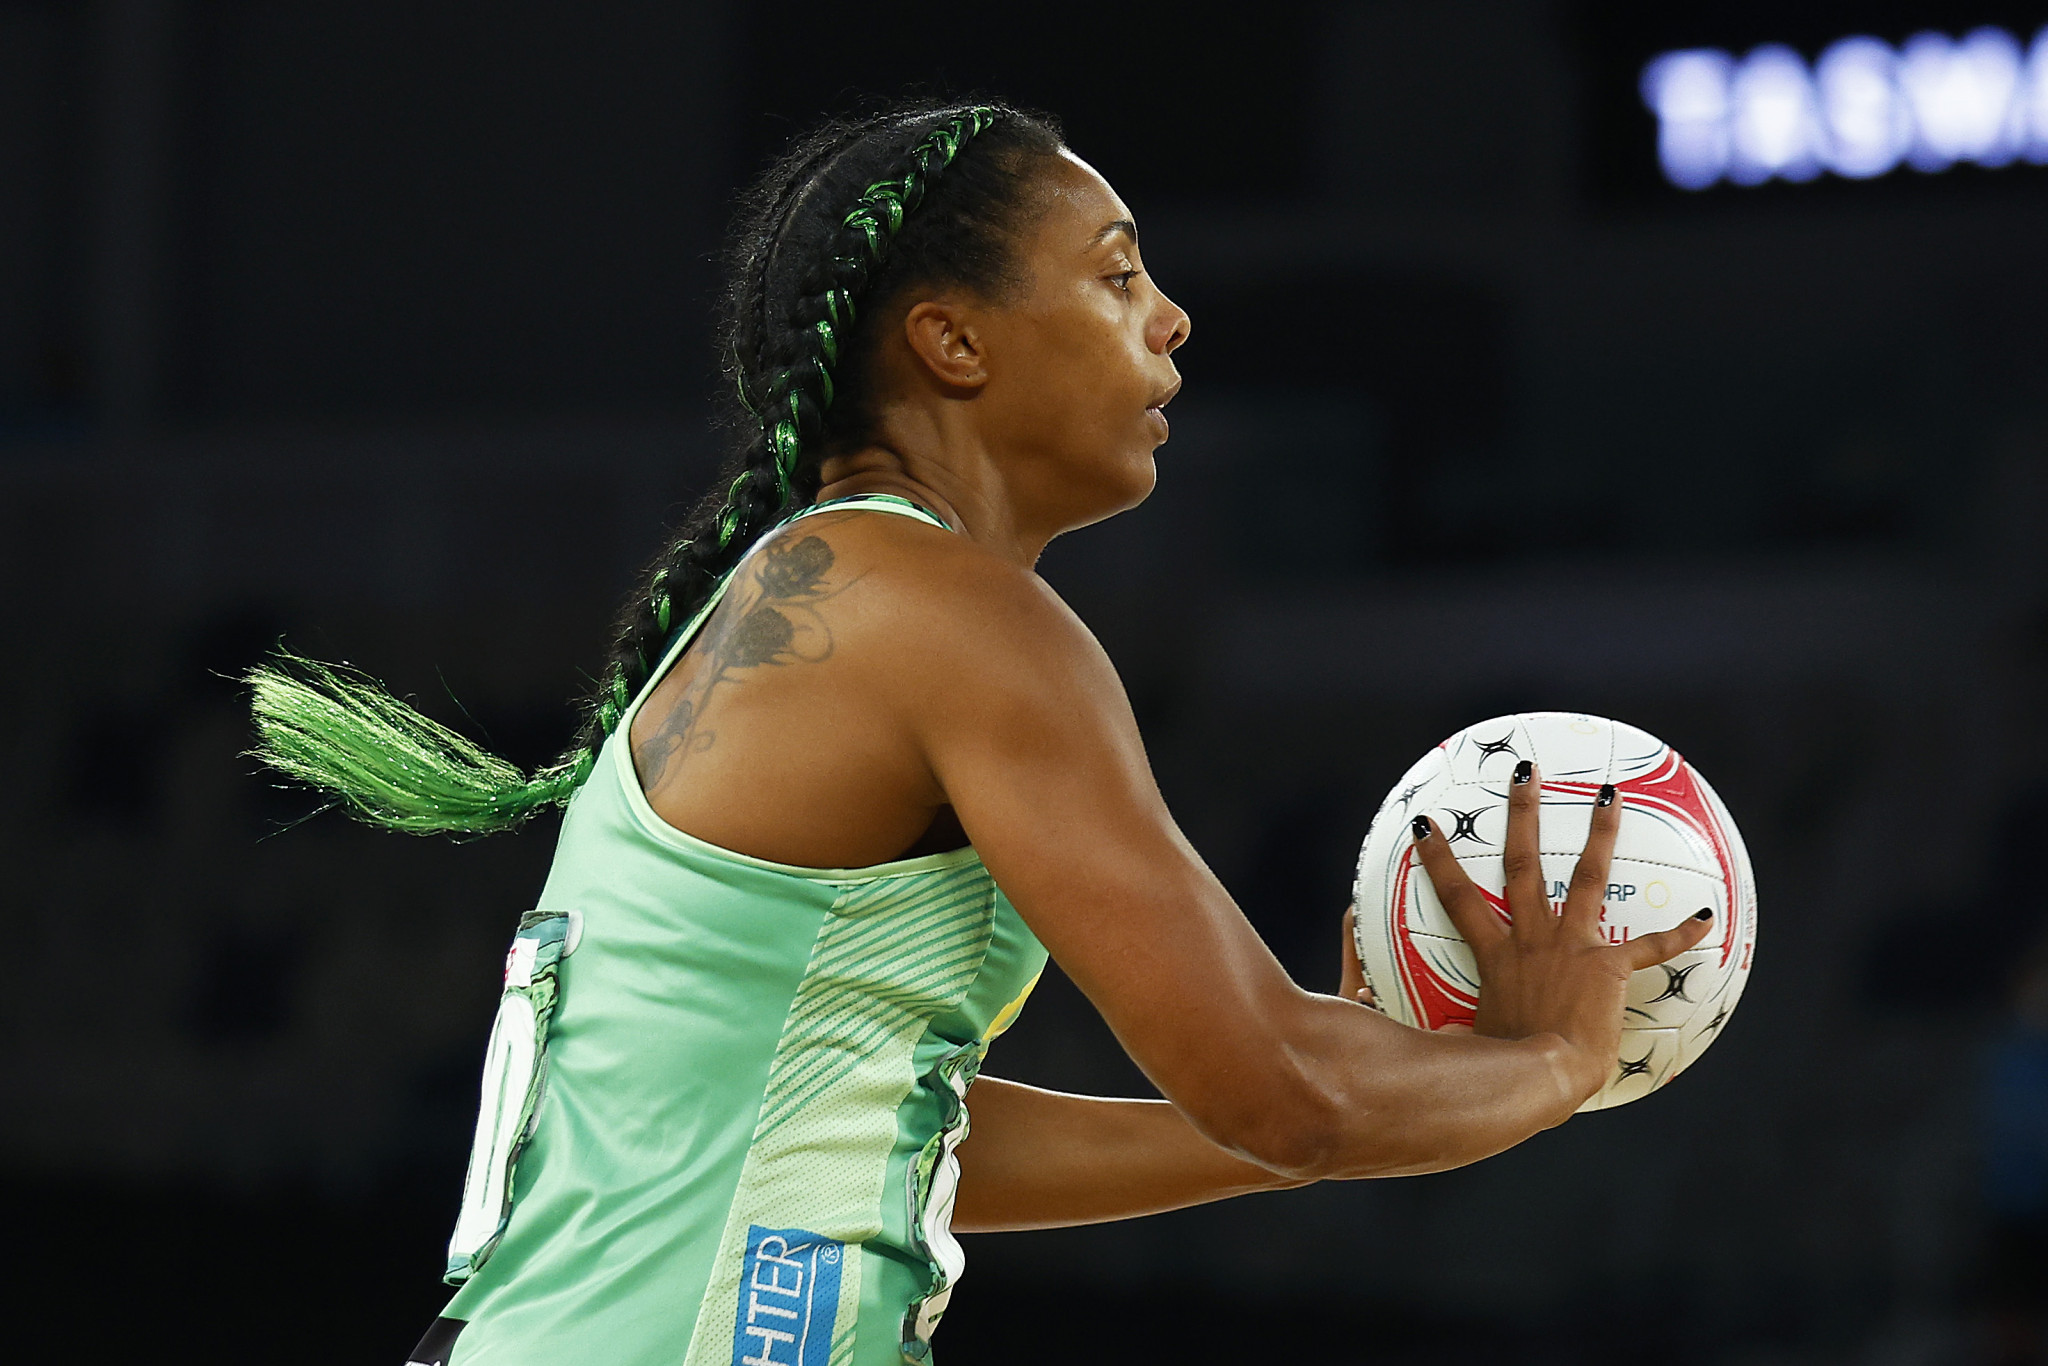 England netball player claims Birmingham 2022 offers chance to send human rights message